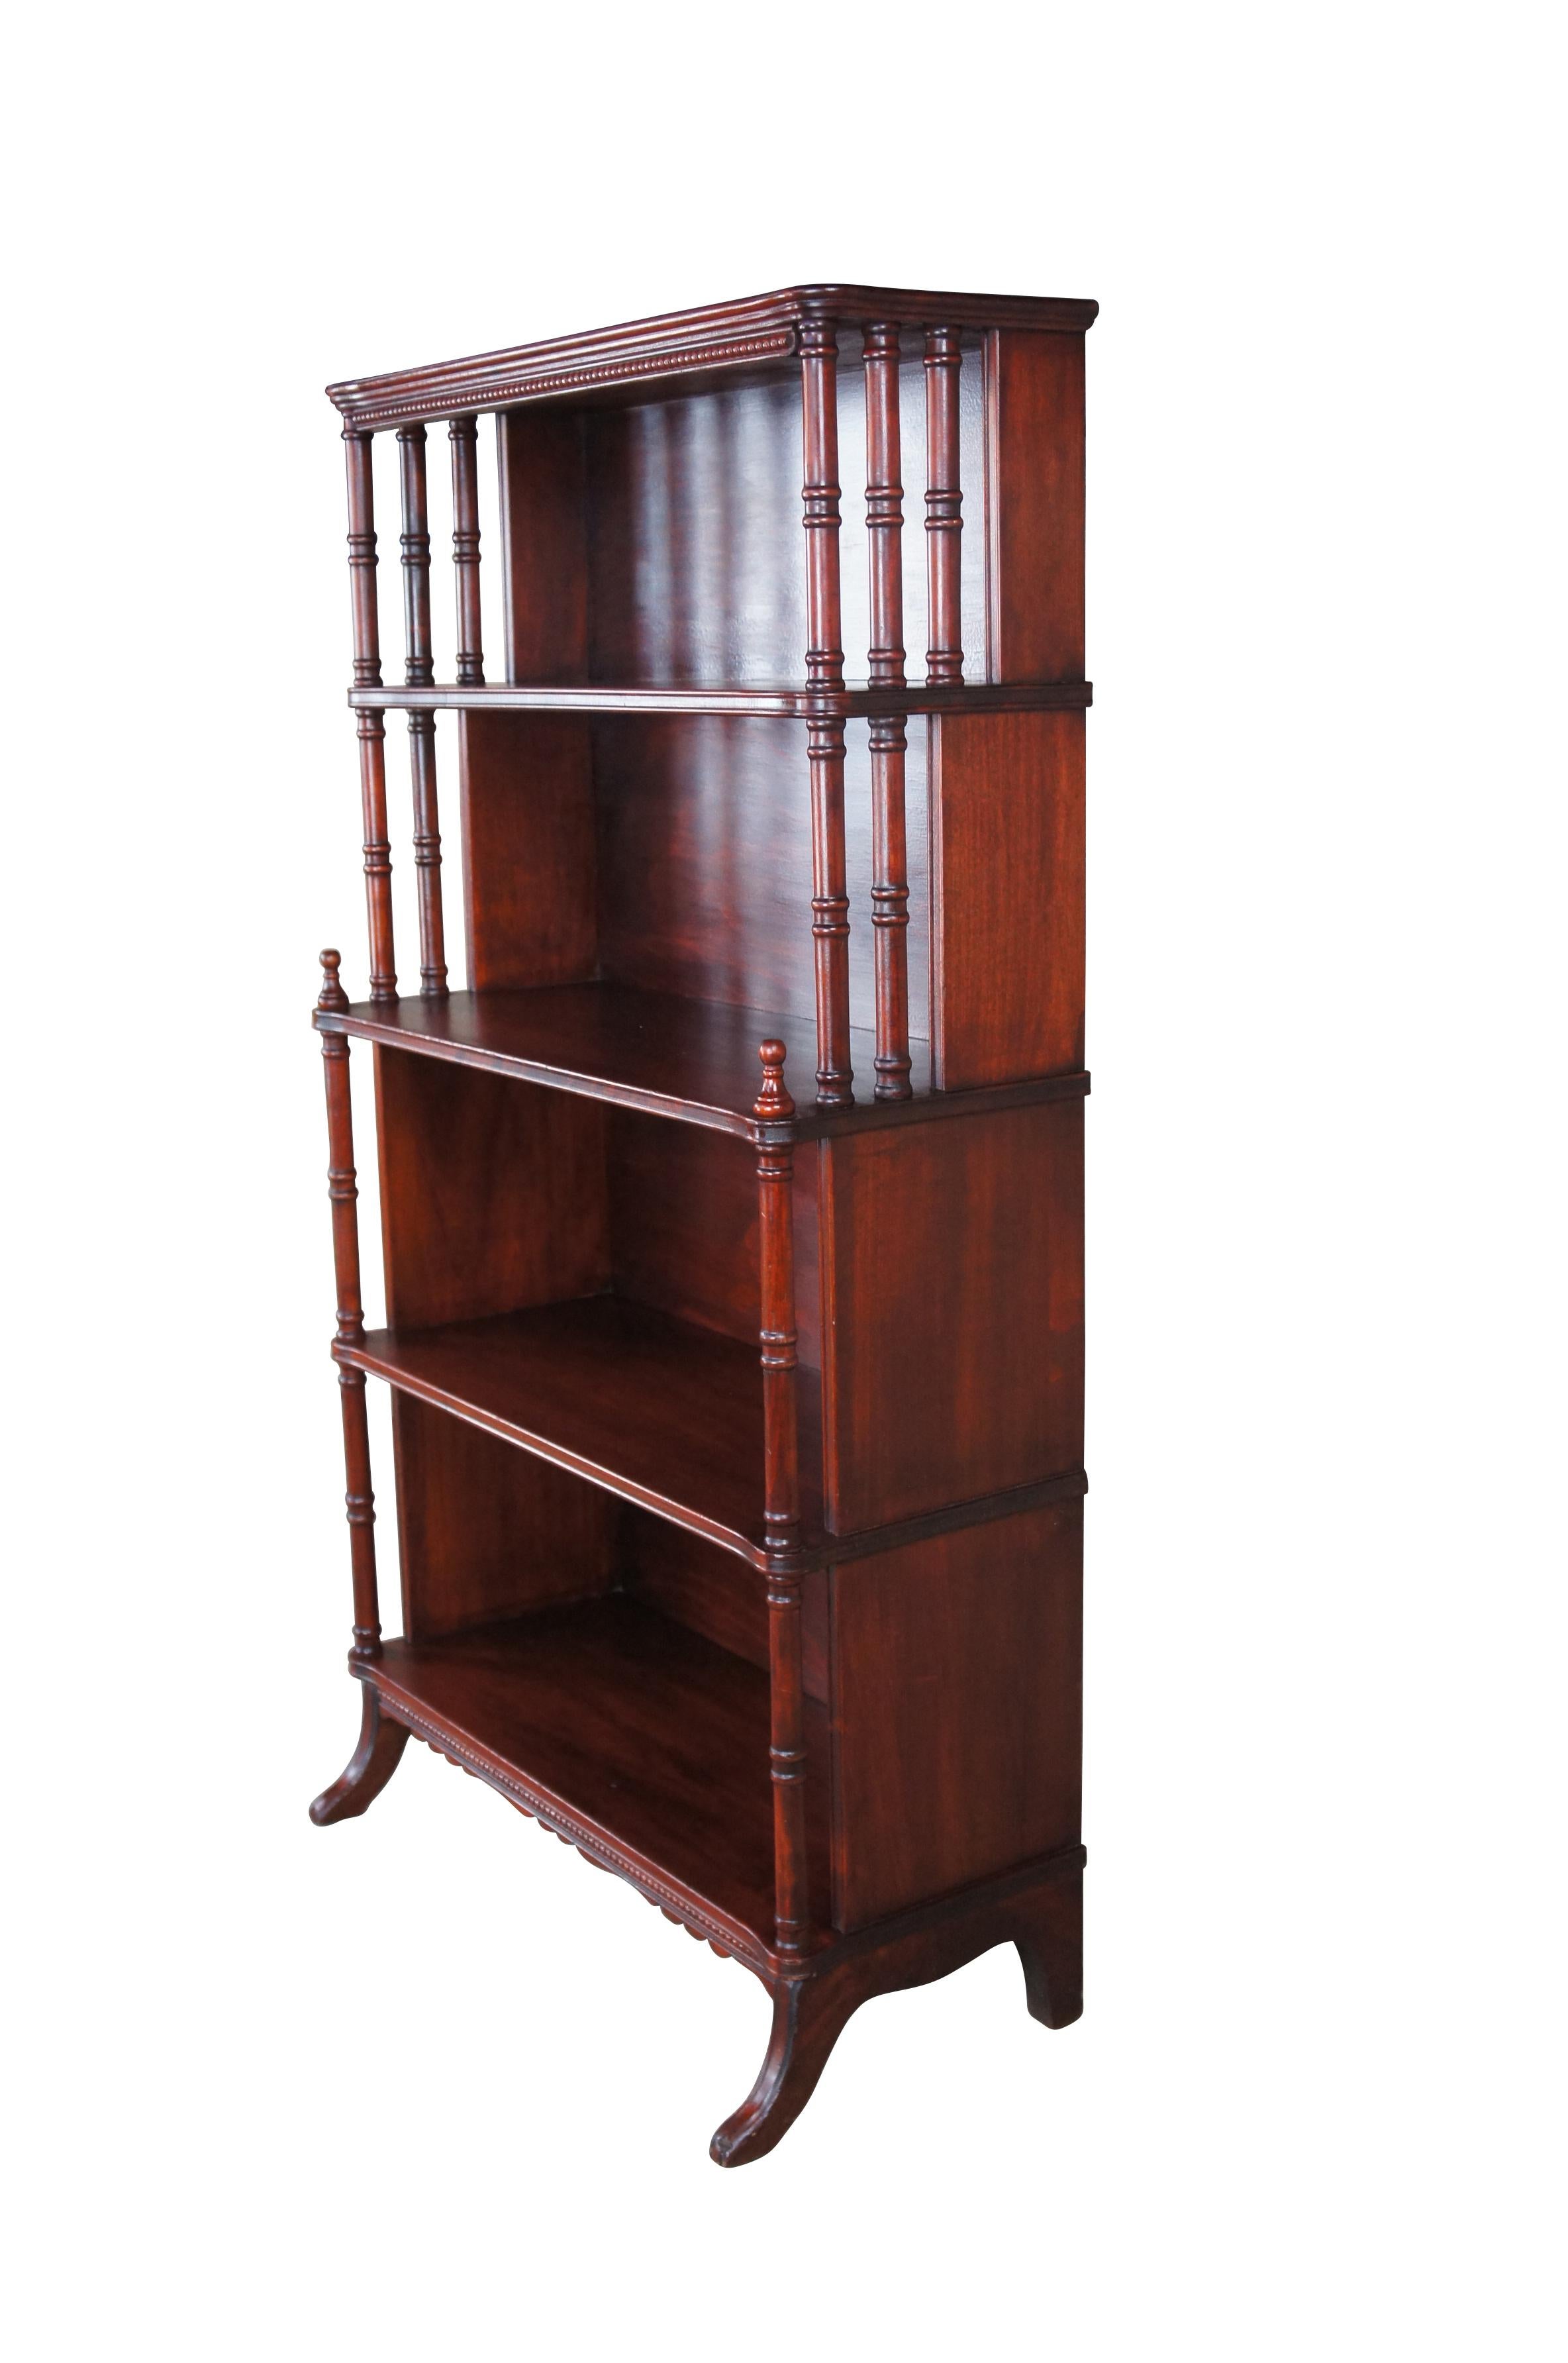 Antique mahogany four shelf book case or display stand featuring a step back design with turned posts and Duncan Phyfe legs.  Circa 1940.

Dimensions:
28